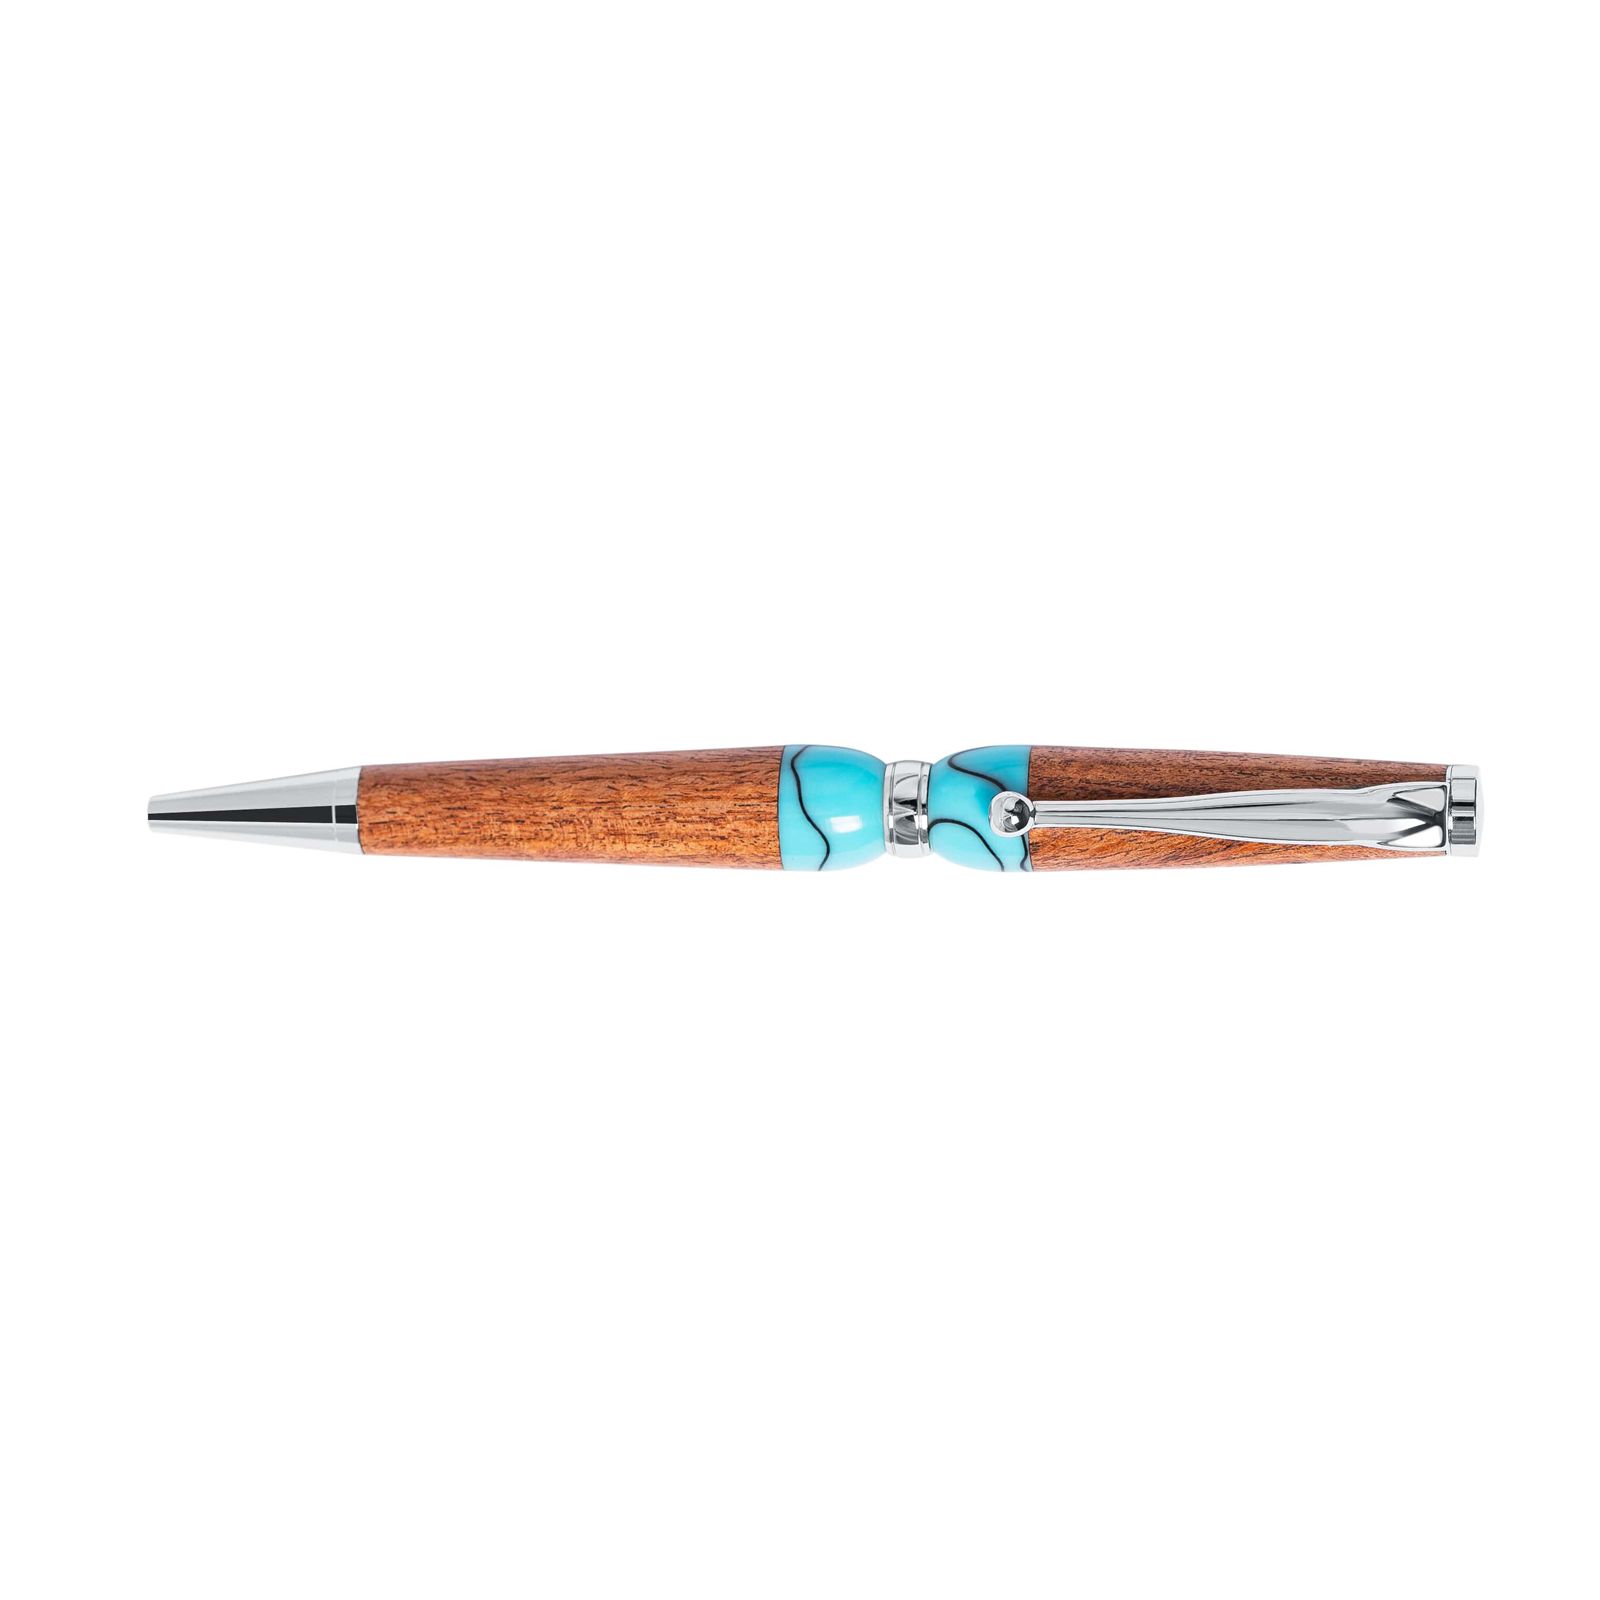 Mesquite and Turquoise Ballpoint Pen